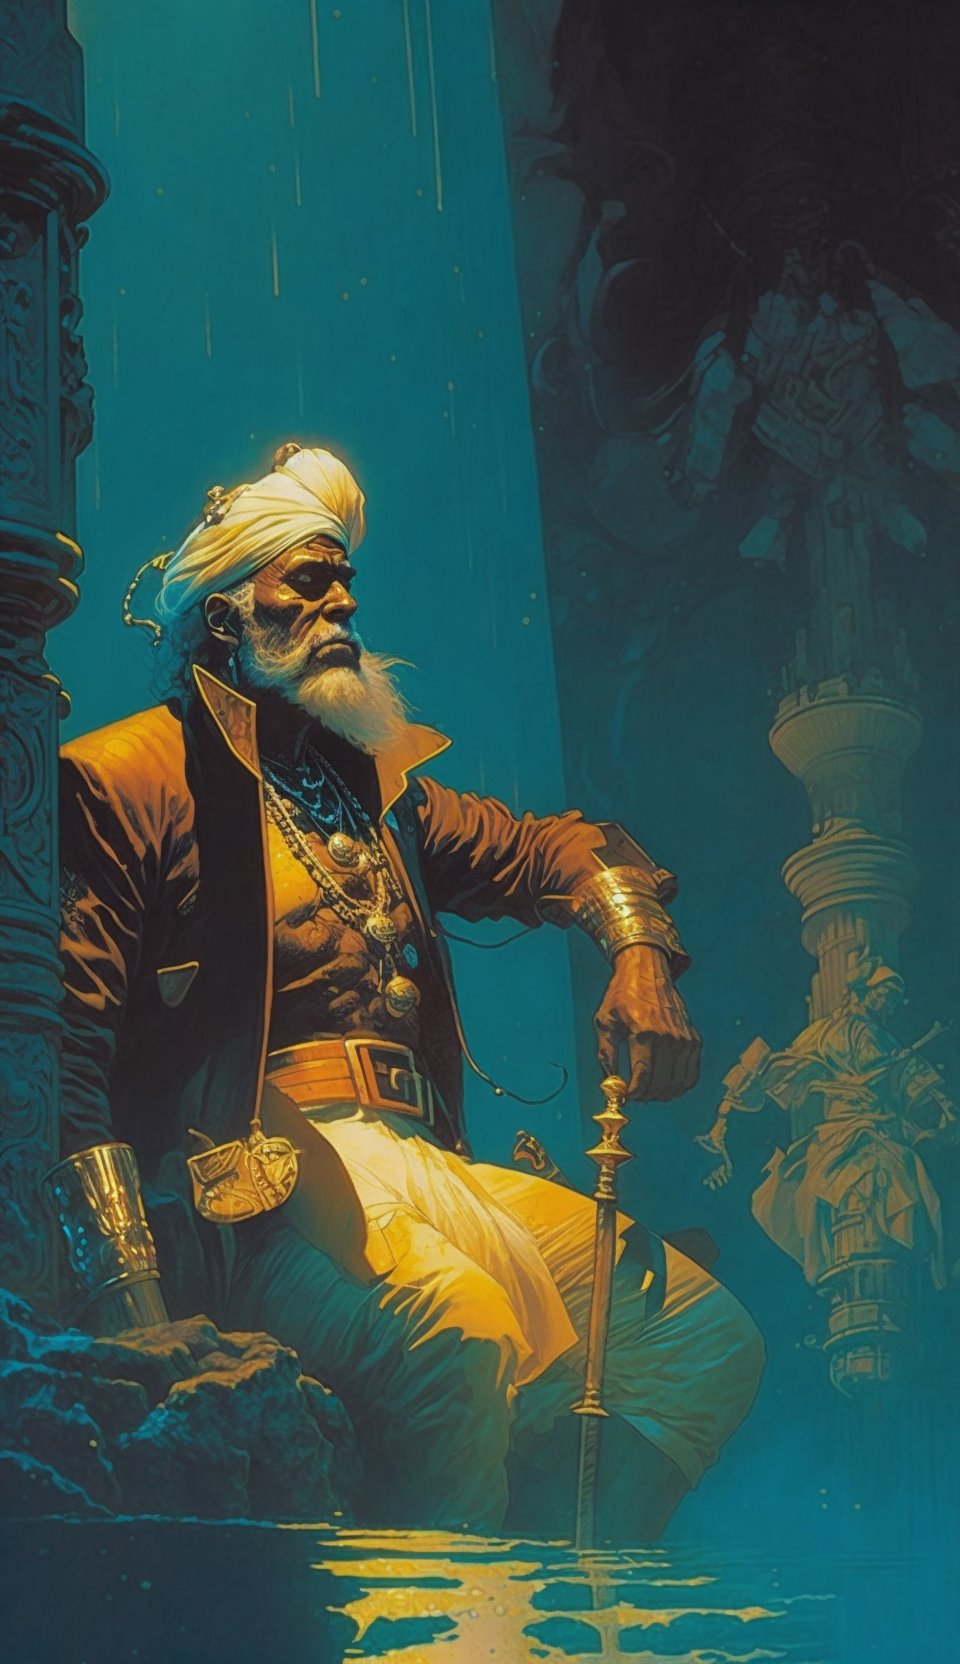 oliveraberger_Indian_ethnicity_Captain_nemo_in_a_busy_underwate_2dfe5671-3883-4e78-aff5-c4e9542fdc67.png